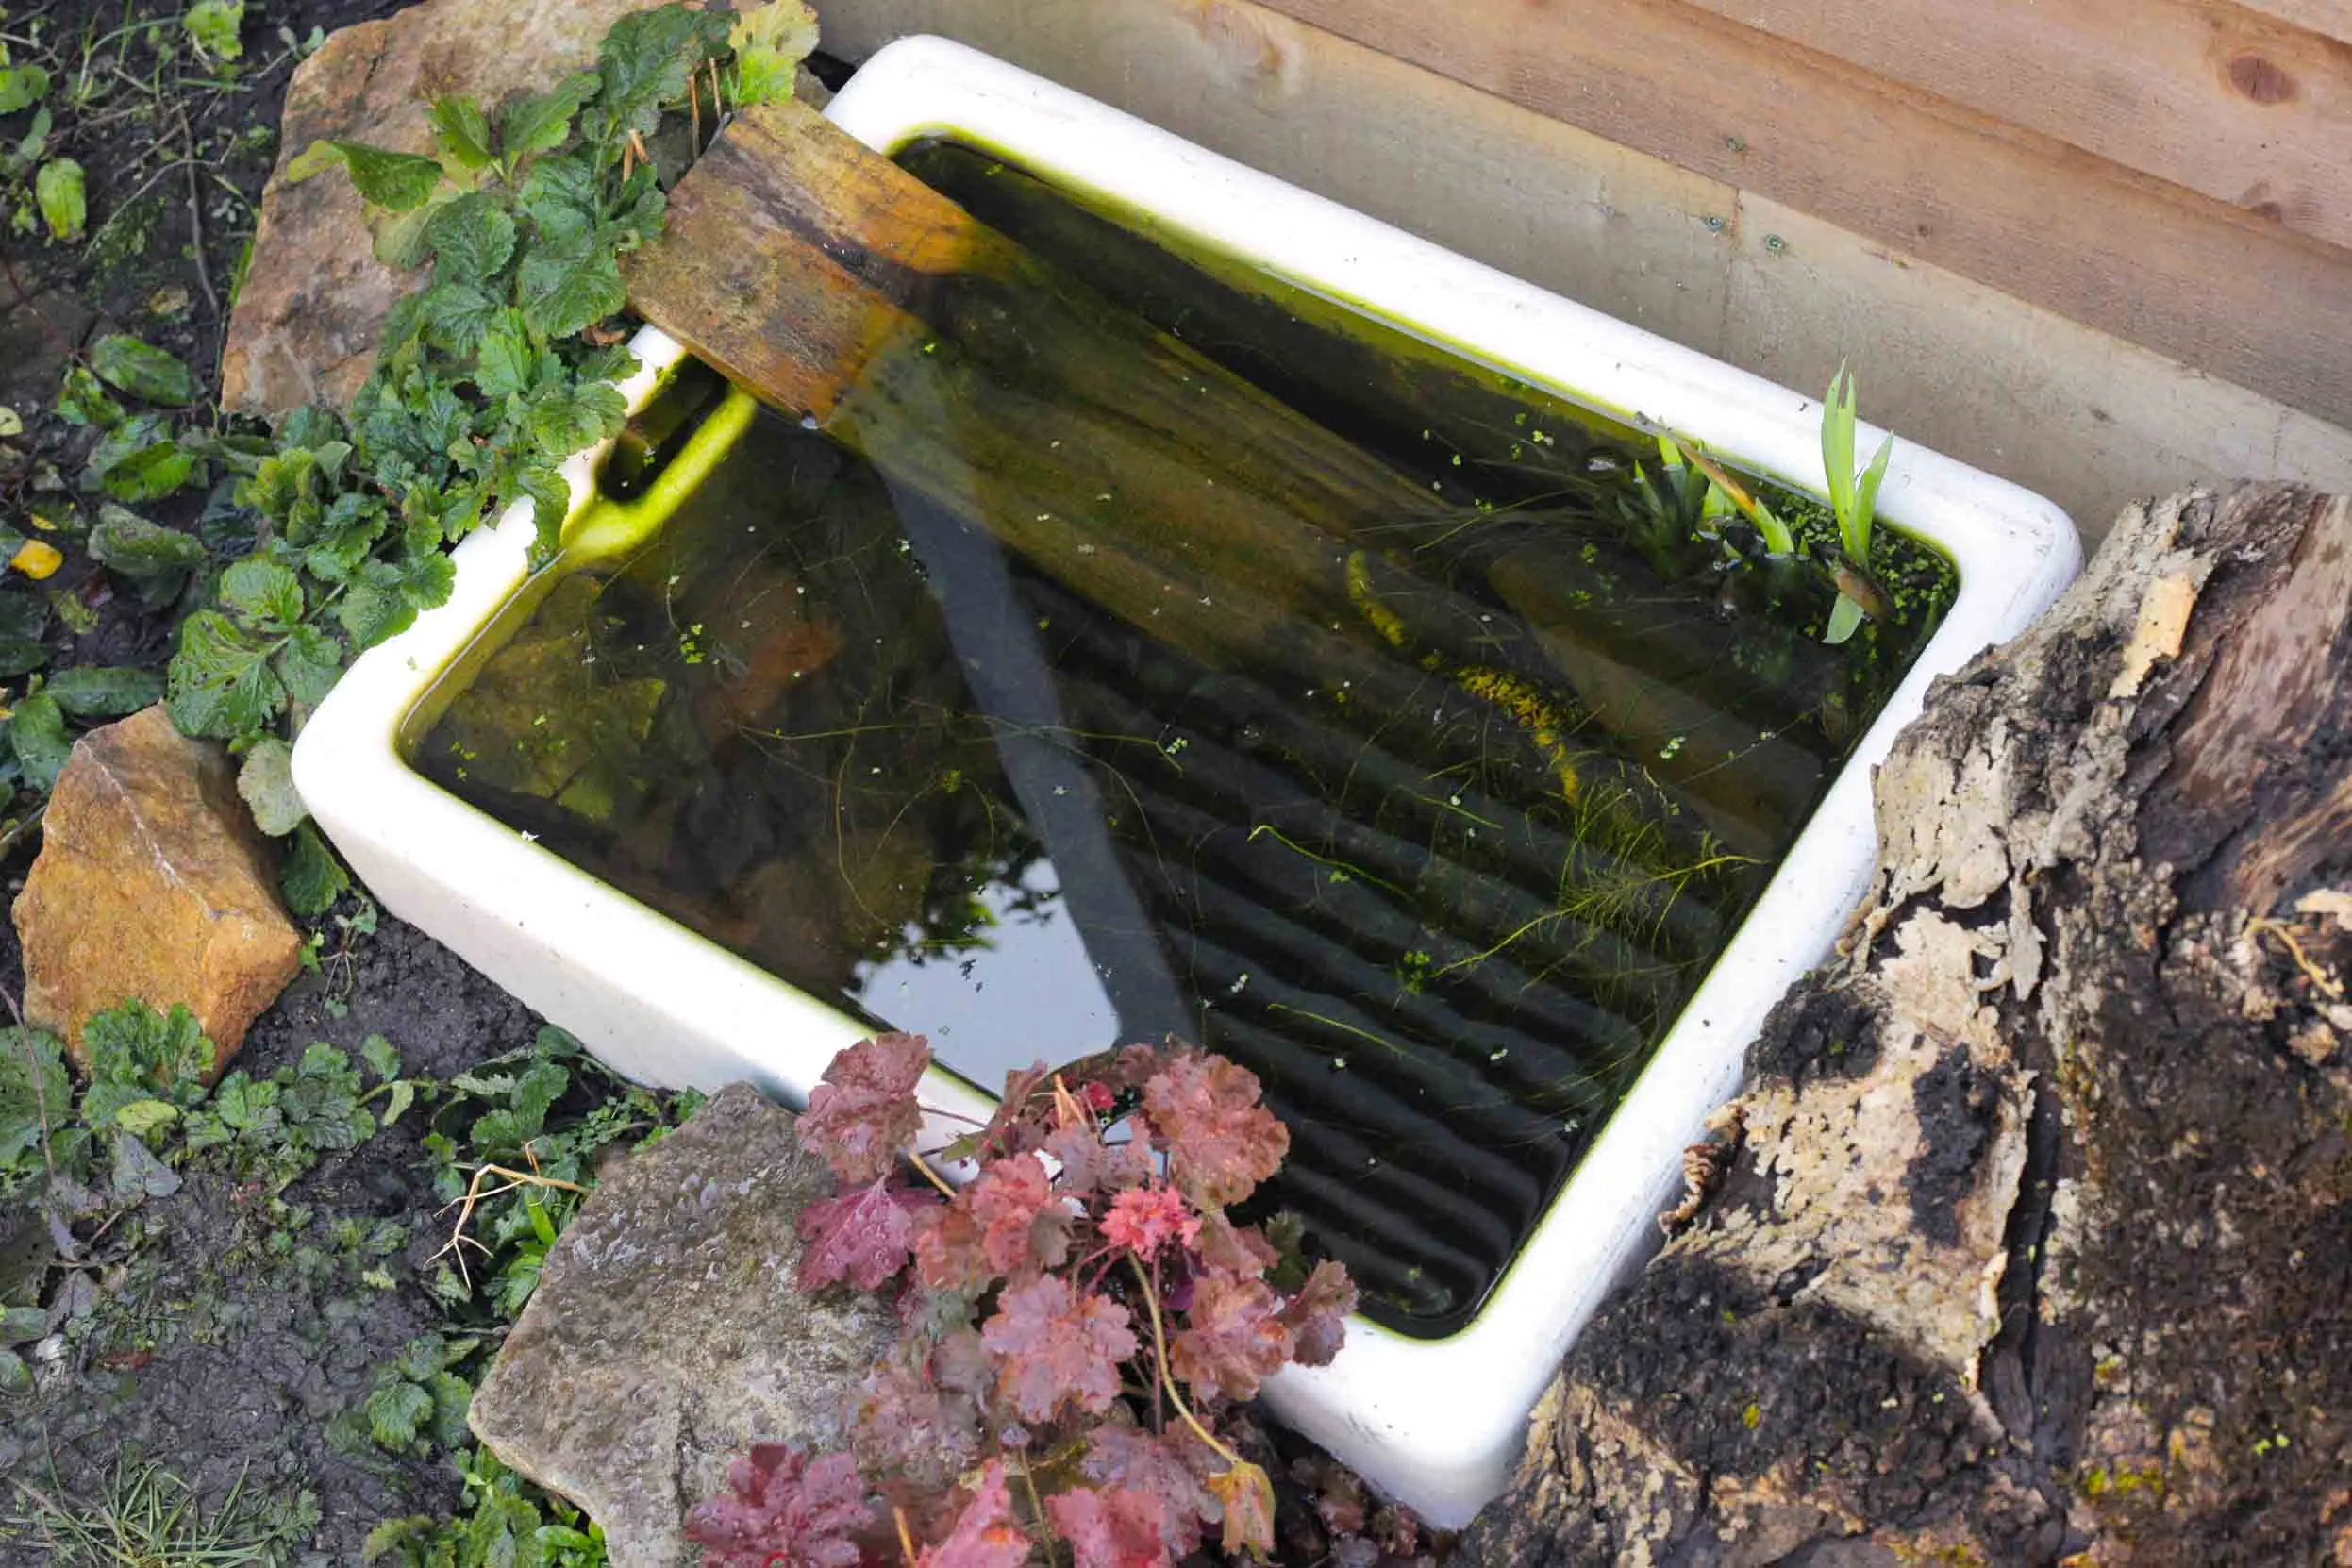 A sink basin that has been placed outside, filled with water and turned into a mini pond.